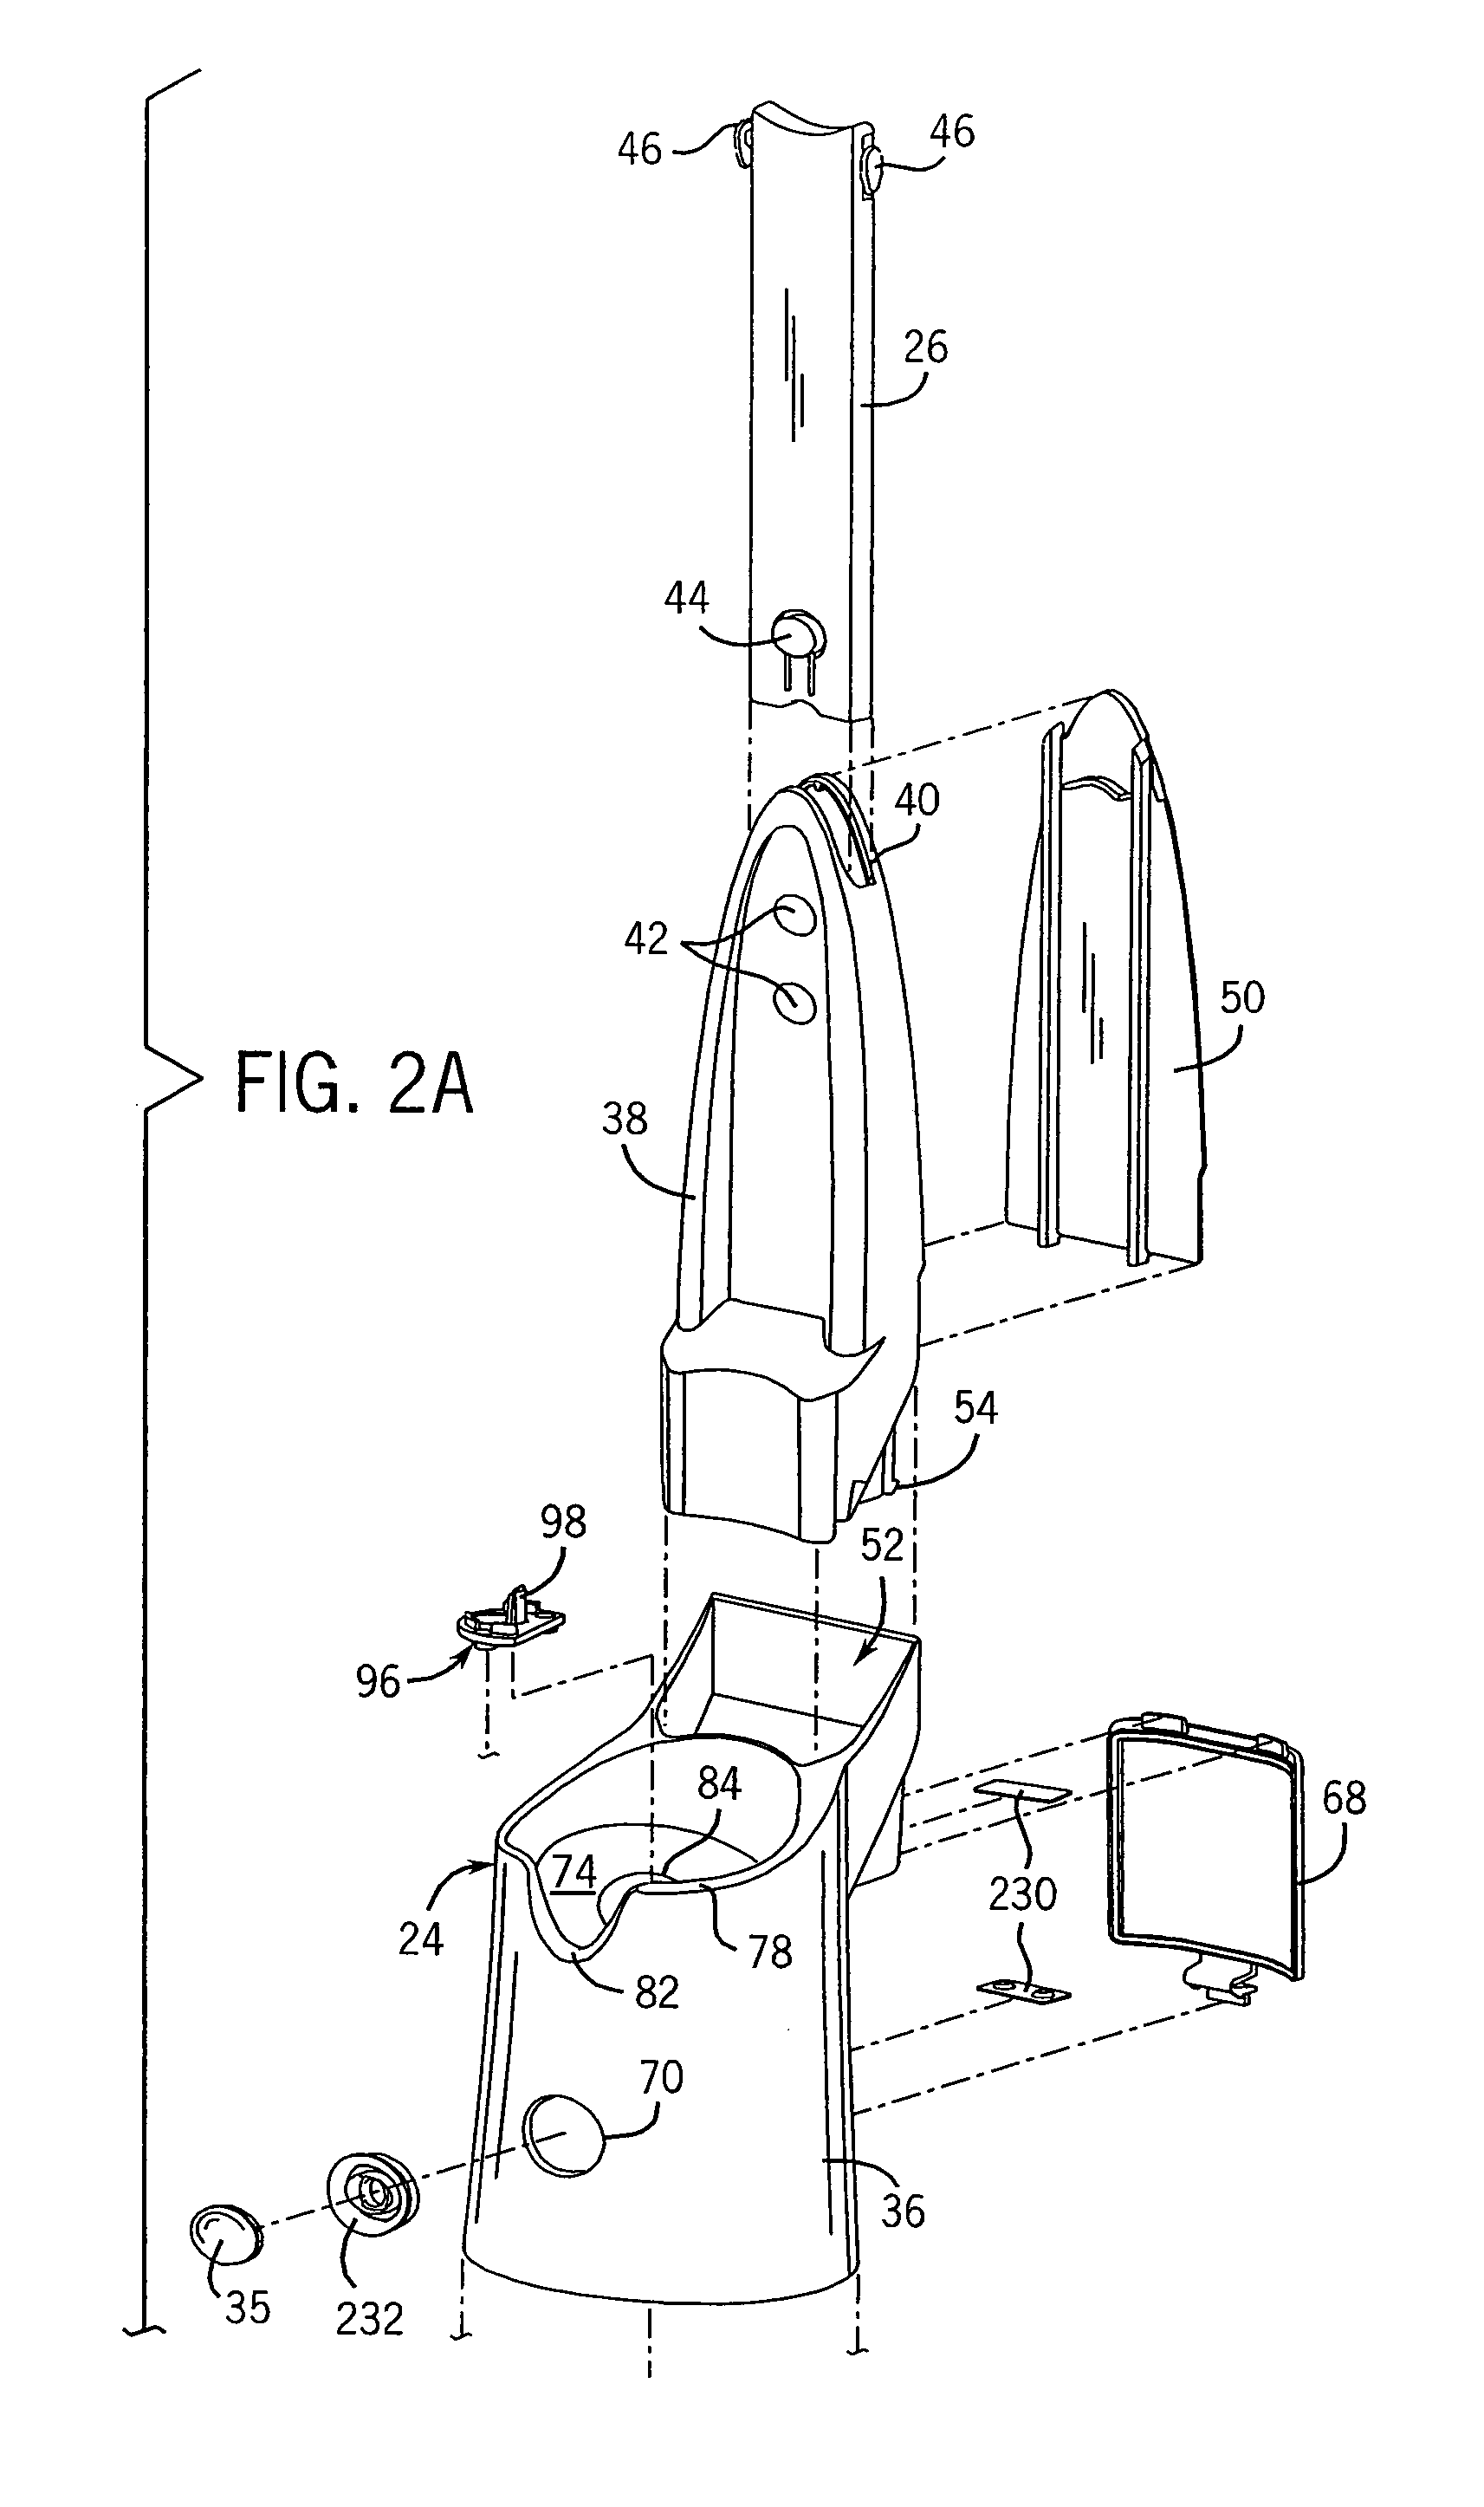 Automated cleansing sprayer having separate cleanser and air vent paths from bottle